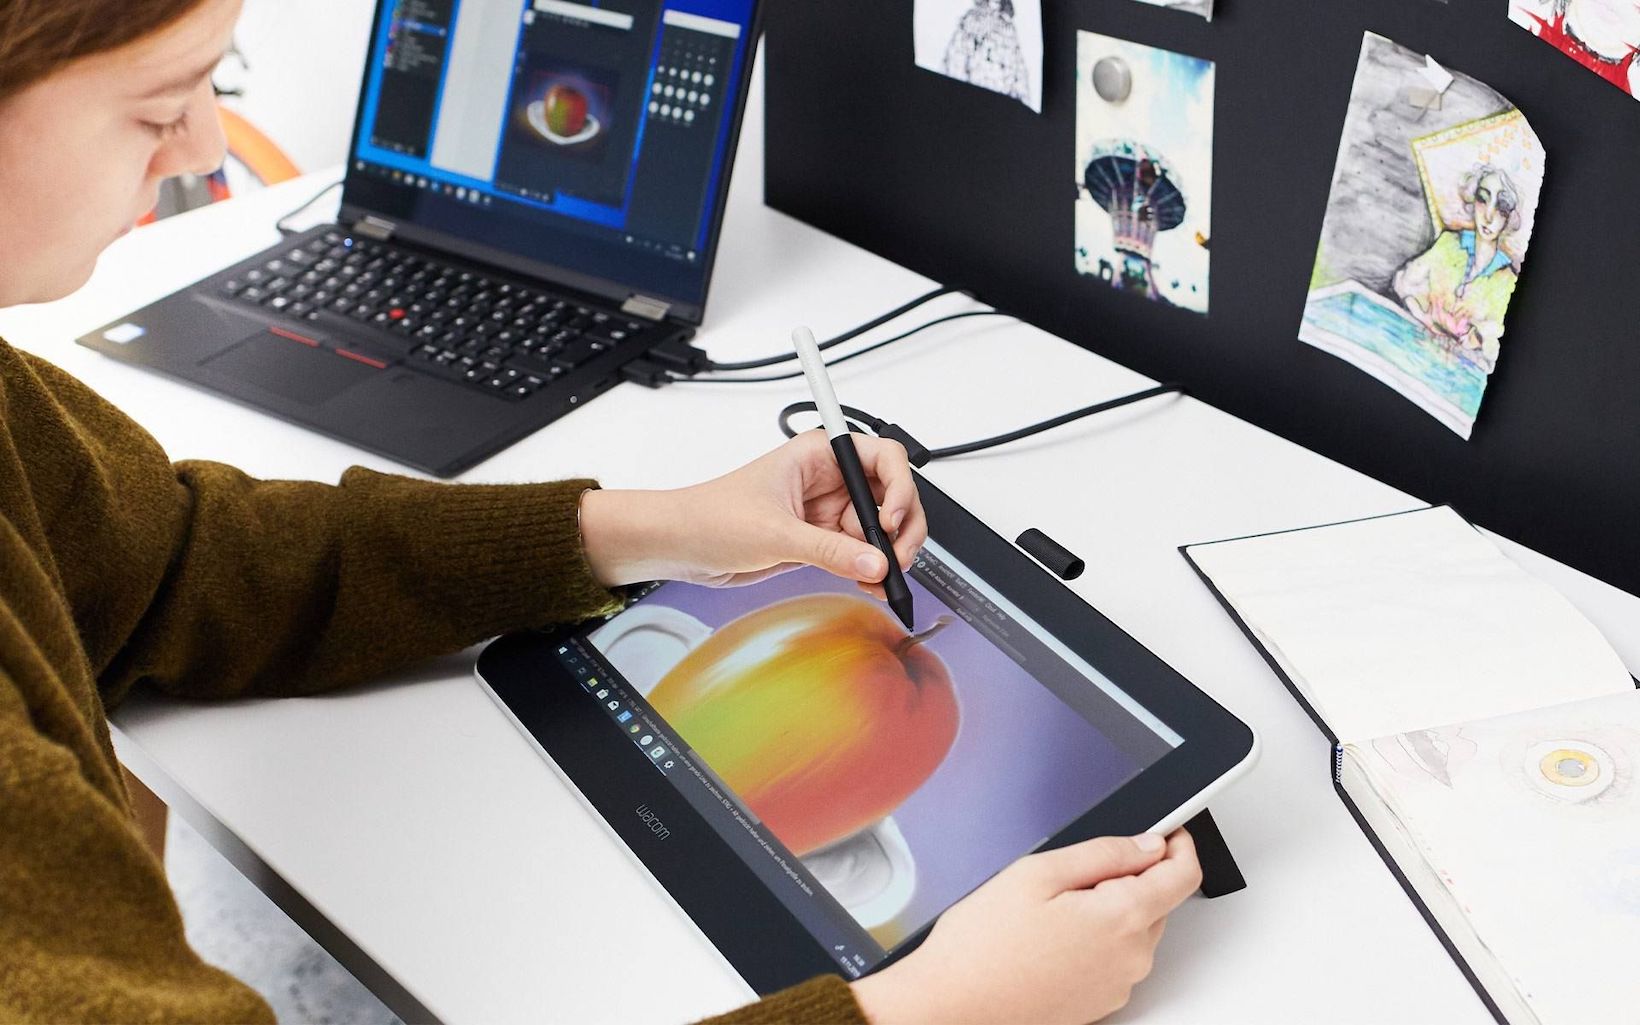 Wacom One with Display Screen buy in india